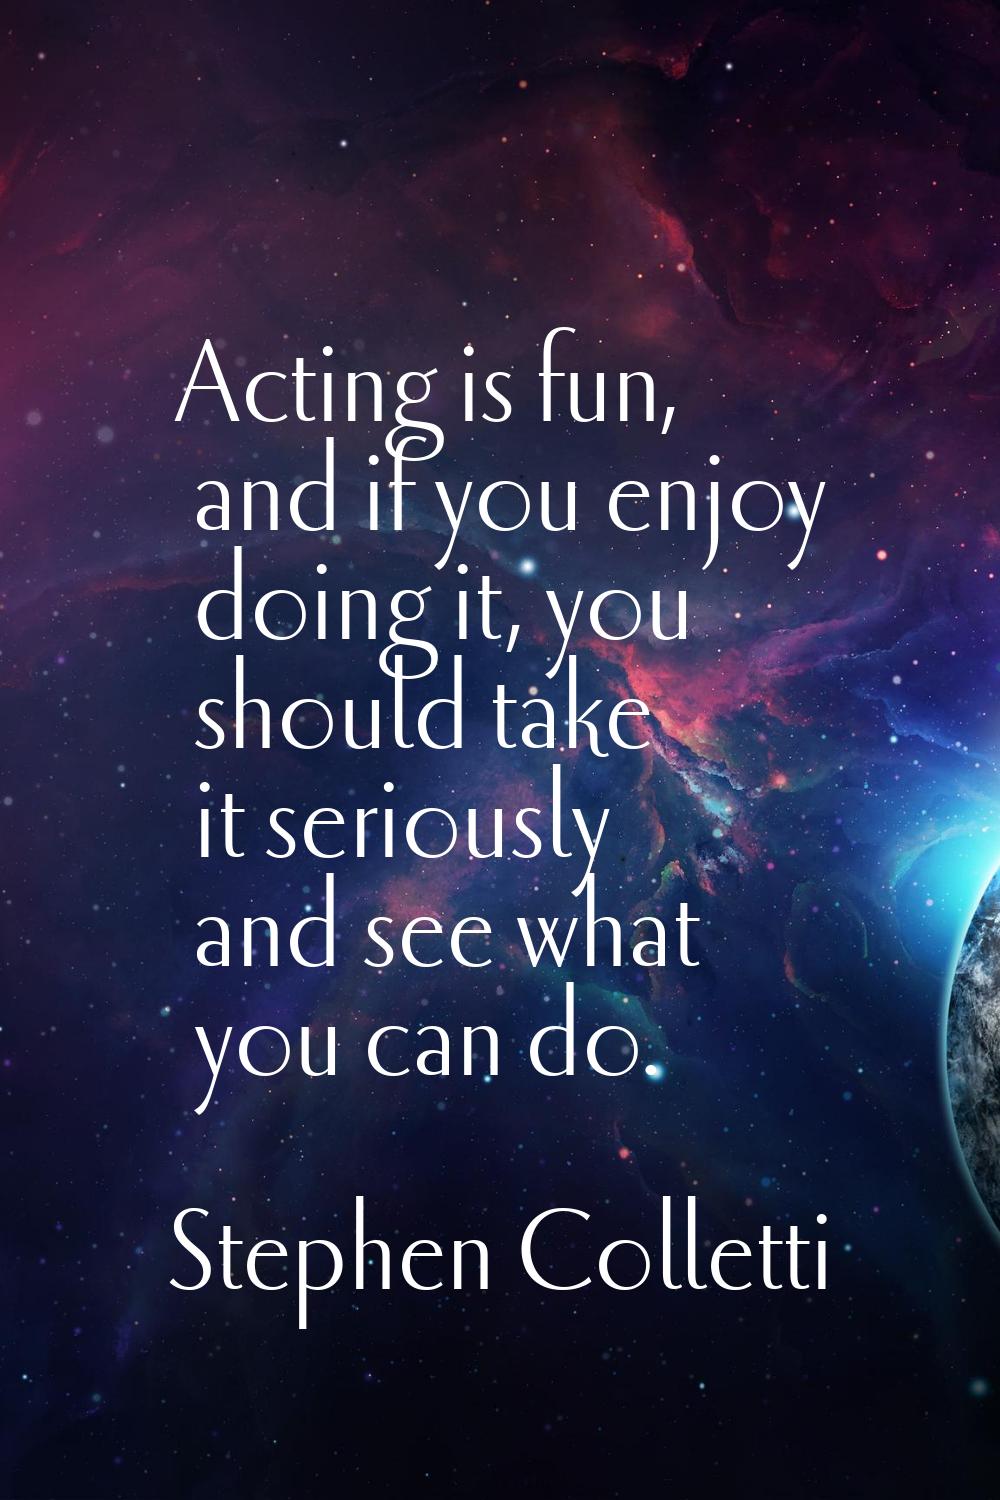 Acting is fun, and if you enjoy doing it, you should take it seriously and see what you can do.